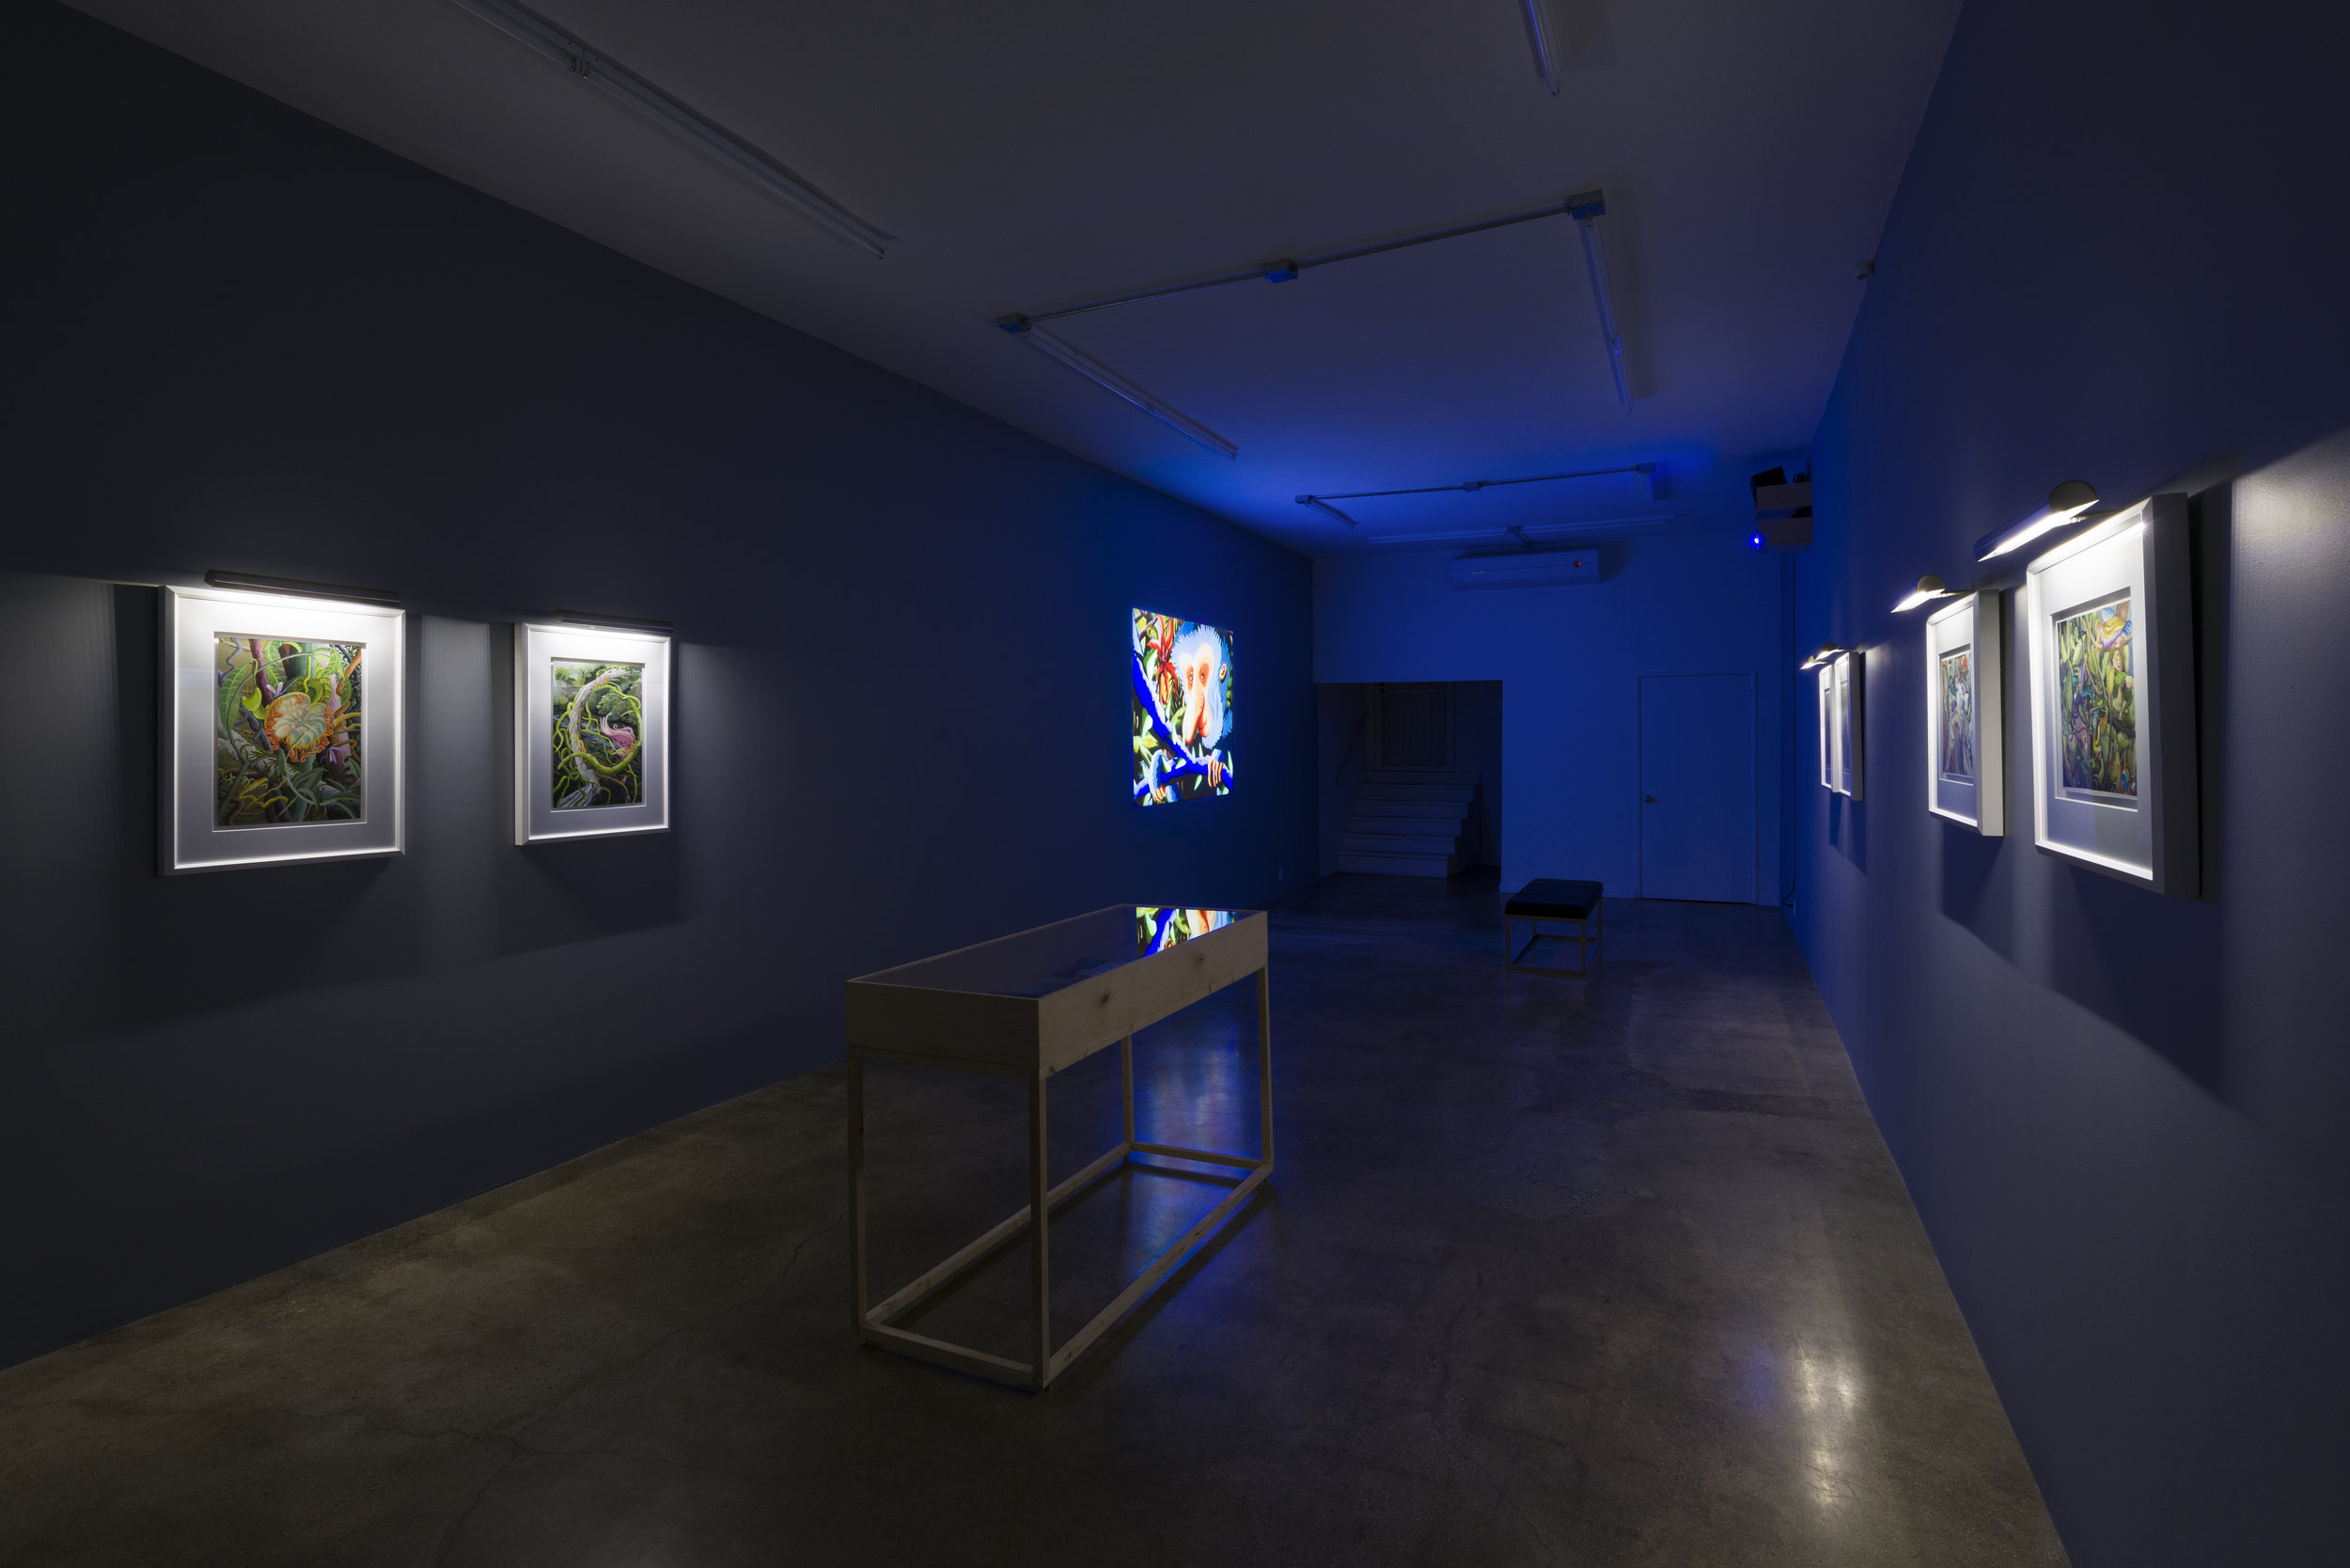  Installation view of Suzan Pitt:  Joy Street   March 31 - May 5, 2019  Photo by Ruben Diaz   Link to press release.  